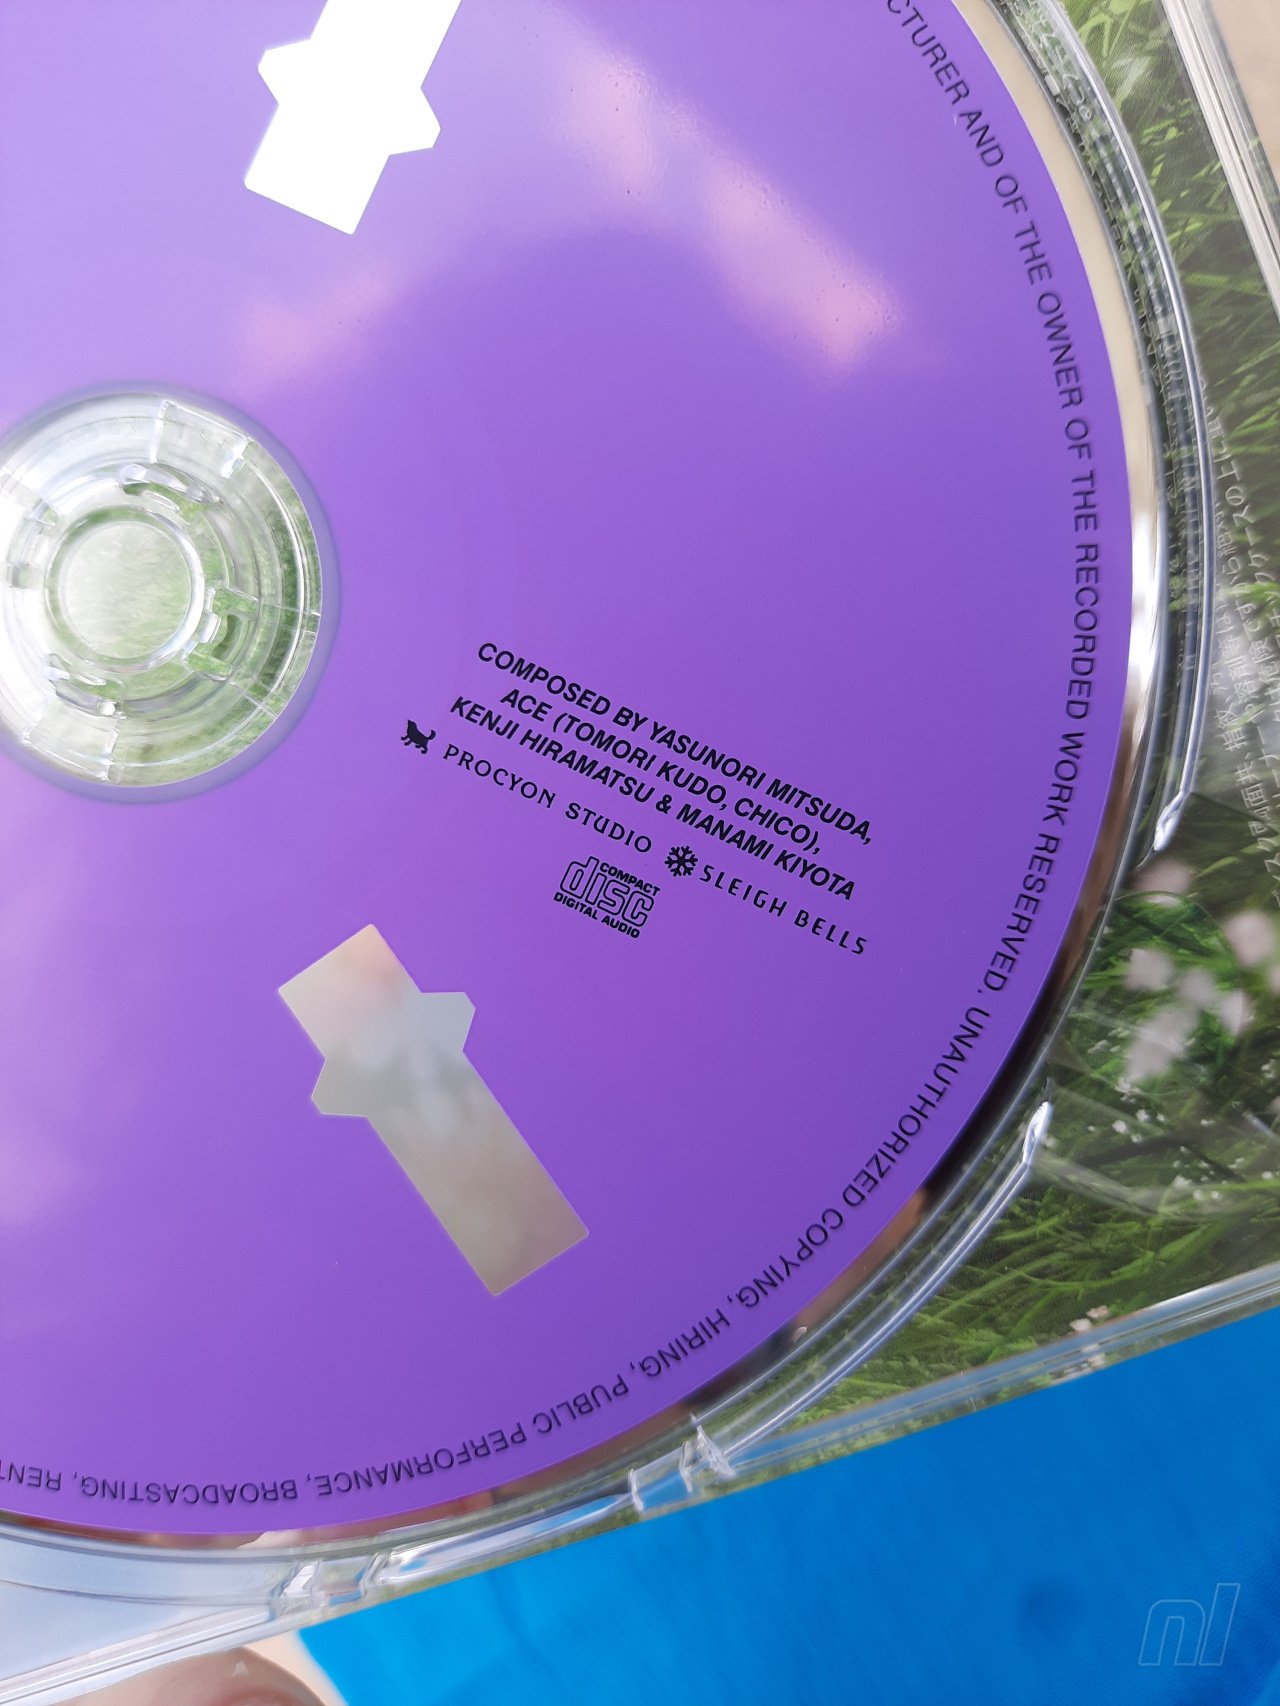 Here's A Look At The Gorgeous Xenoblade Chronicles Original Soundtrack ...